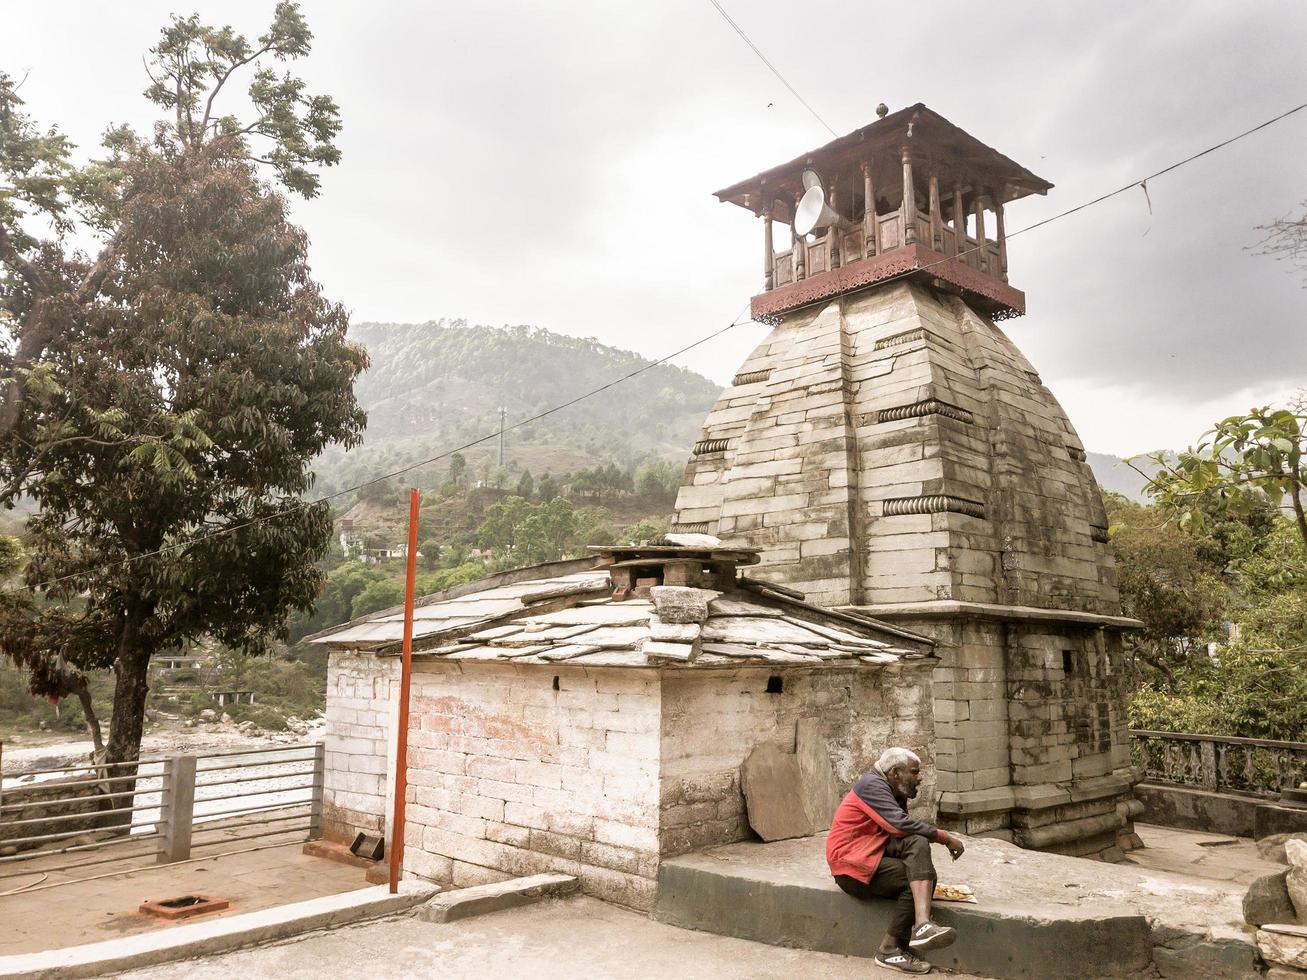 Thal, Uttarakhand - April 2019. An ancient temple in a Himalayan village photo